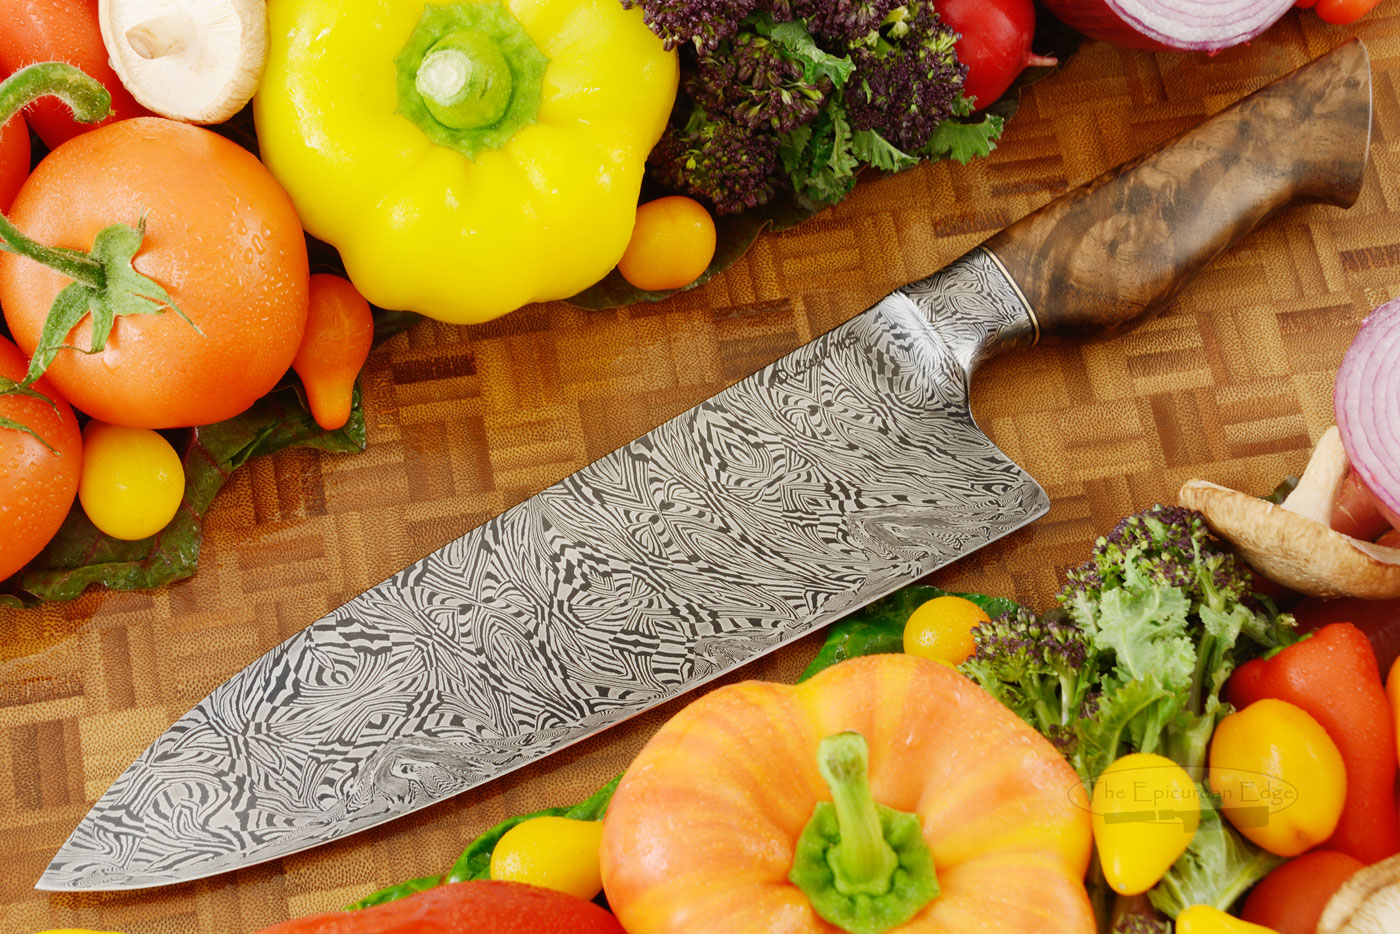 Chef's Knife (9-1/2 in.) with Walnut and Integral Mosaic Damascus